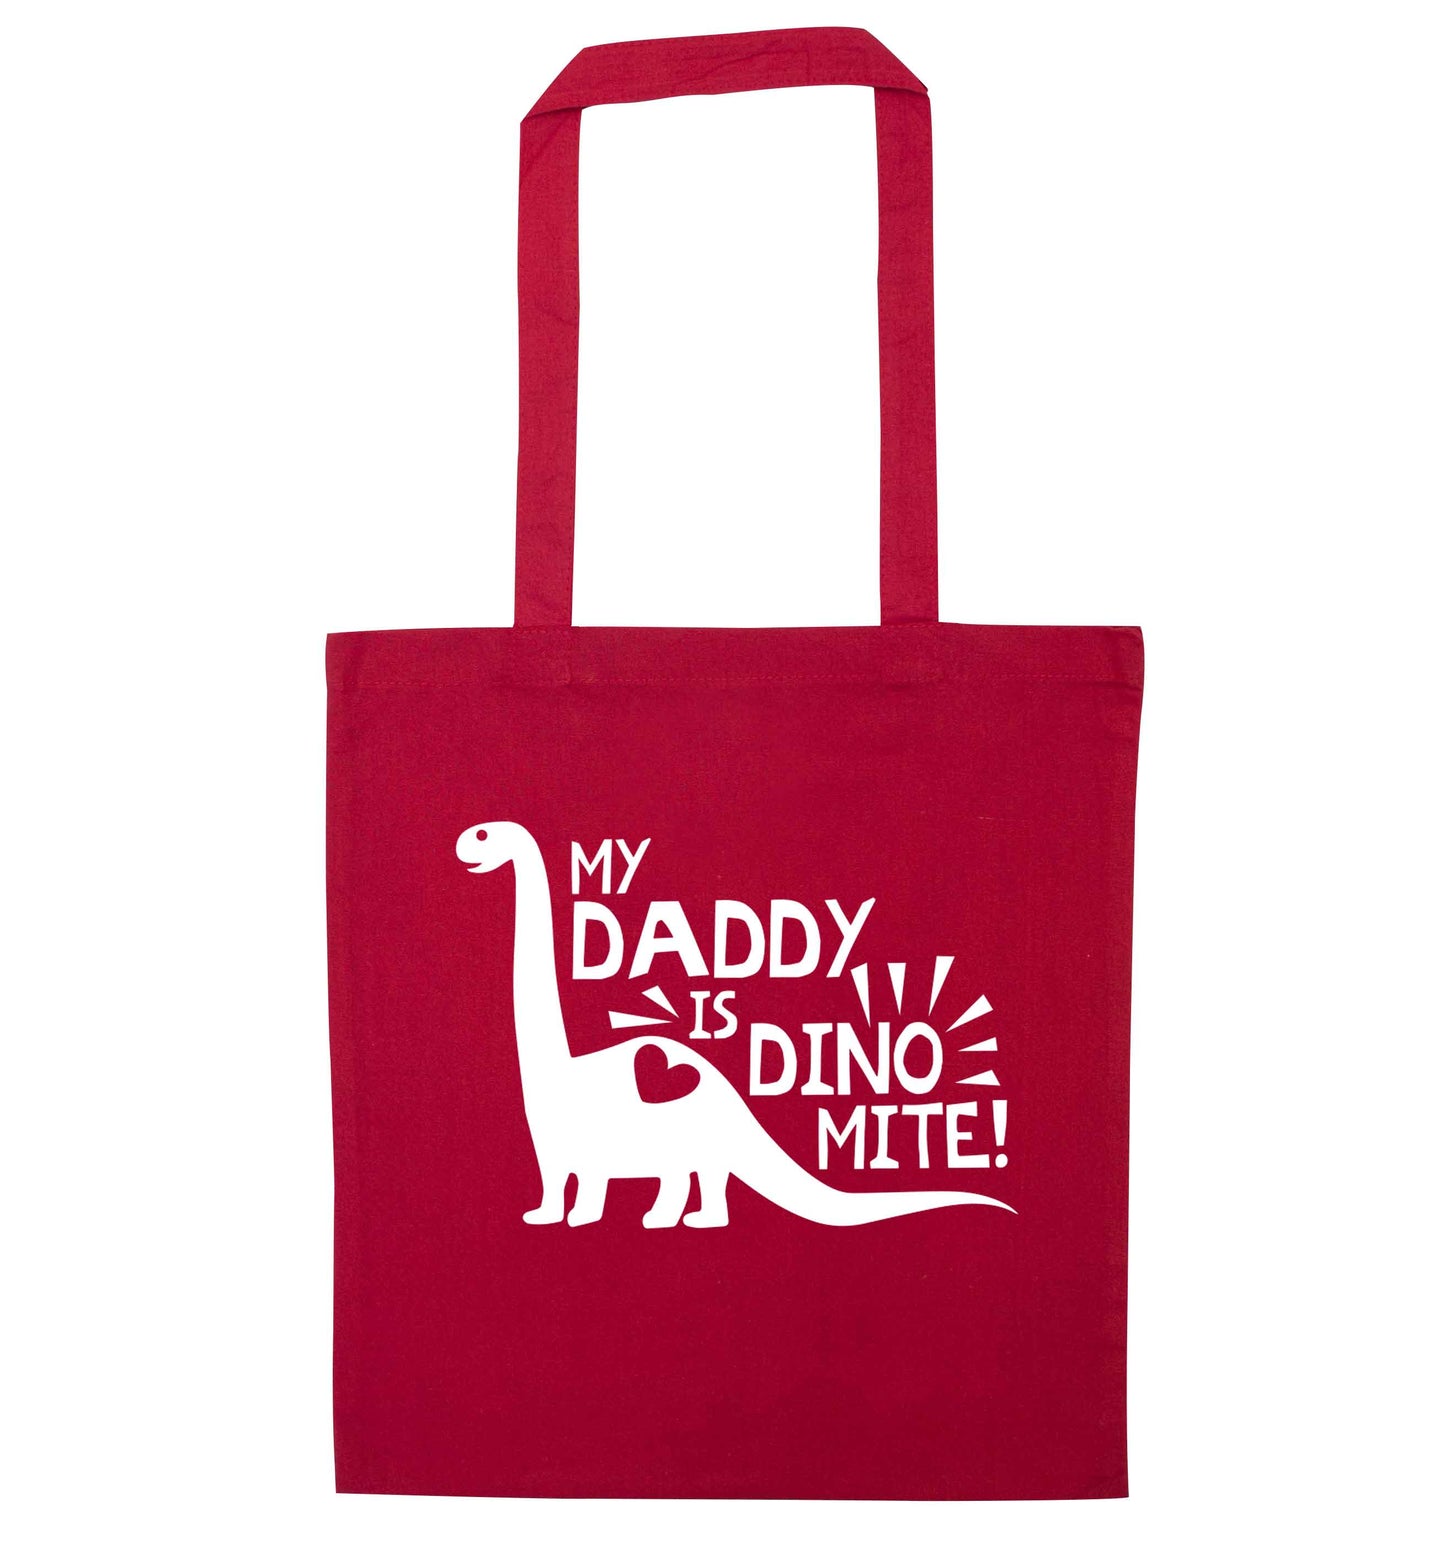 My daddy is dinomite! red tote bag